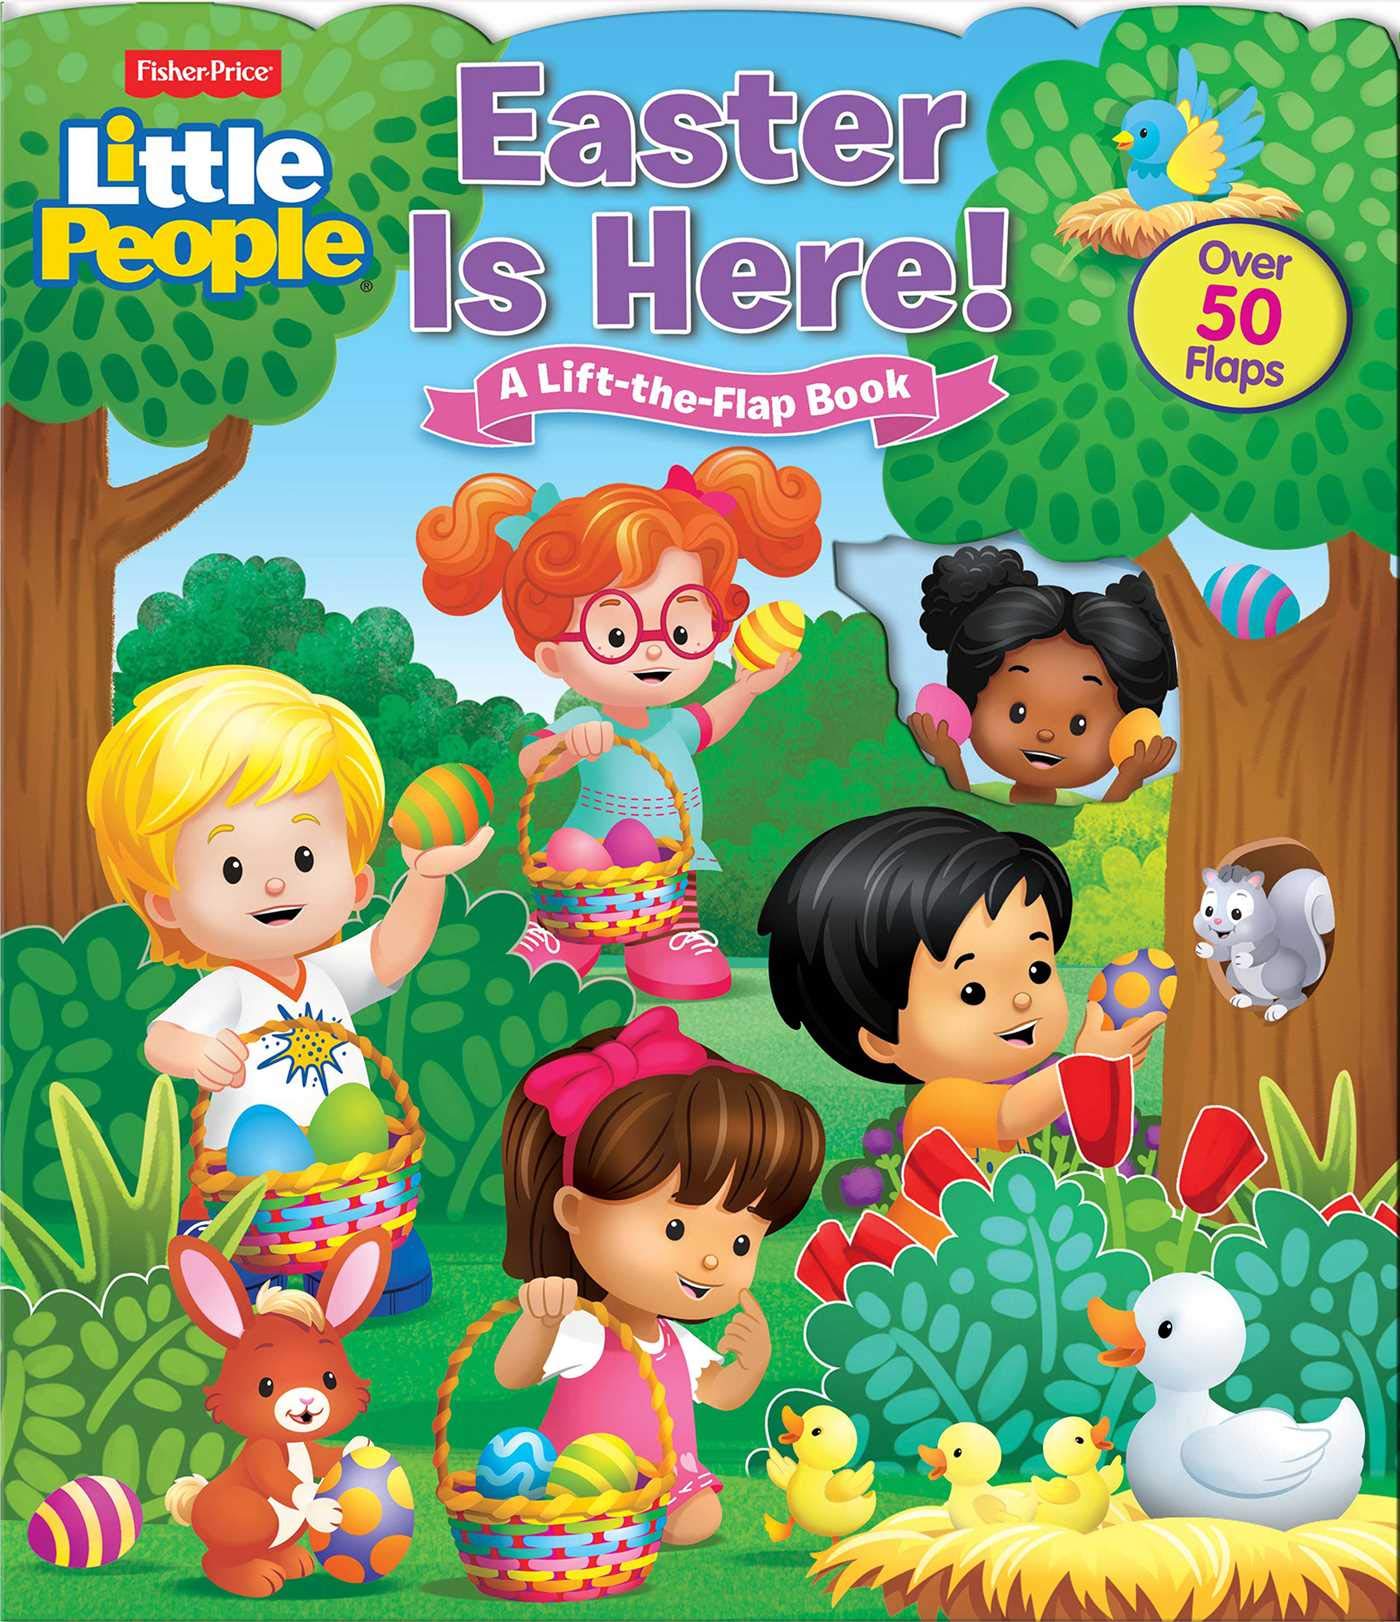 Fisher-Price Little People: Easter Is Here! (Lift-the-Flap)